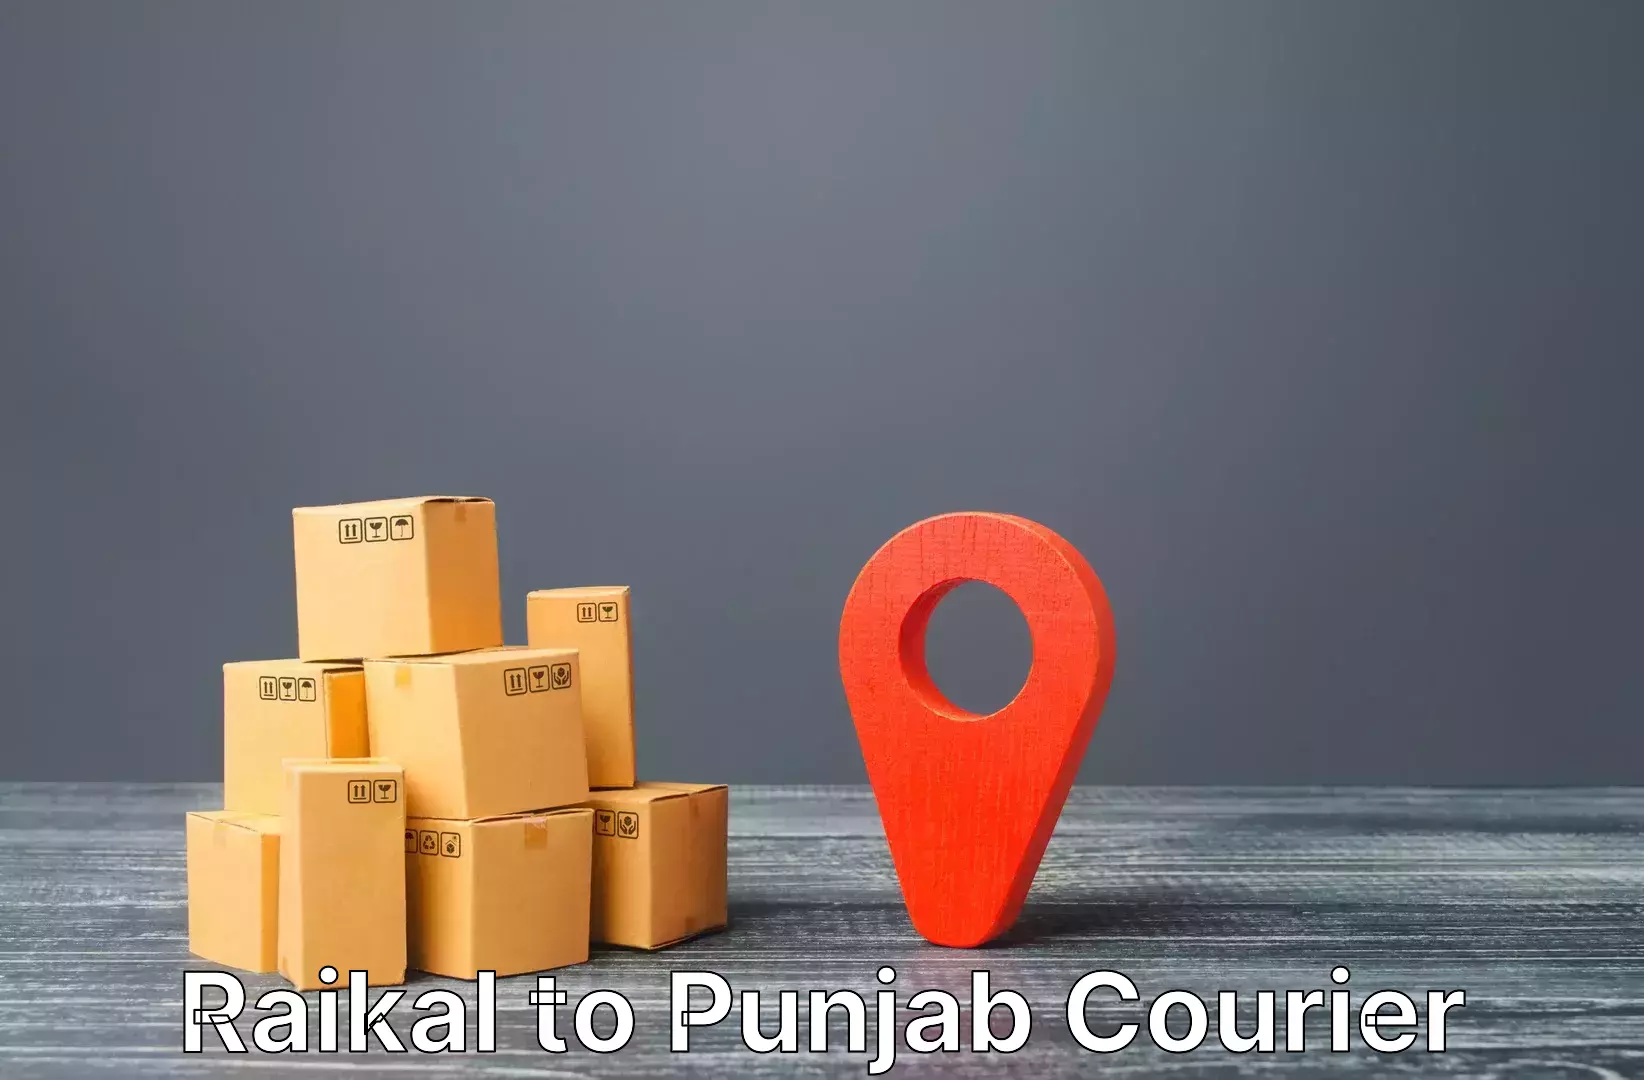 Luggage delivery network Raikal to Amritsar